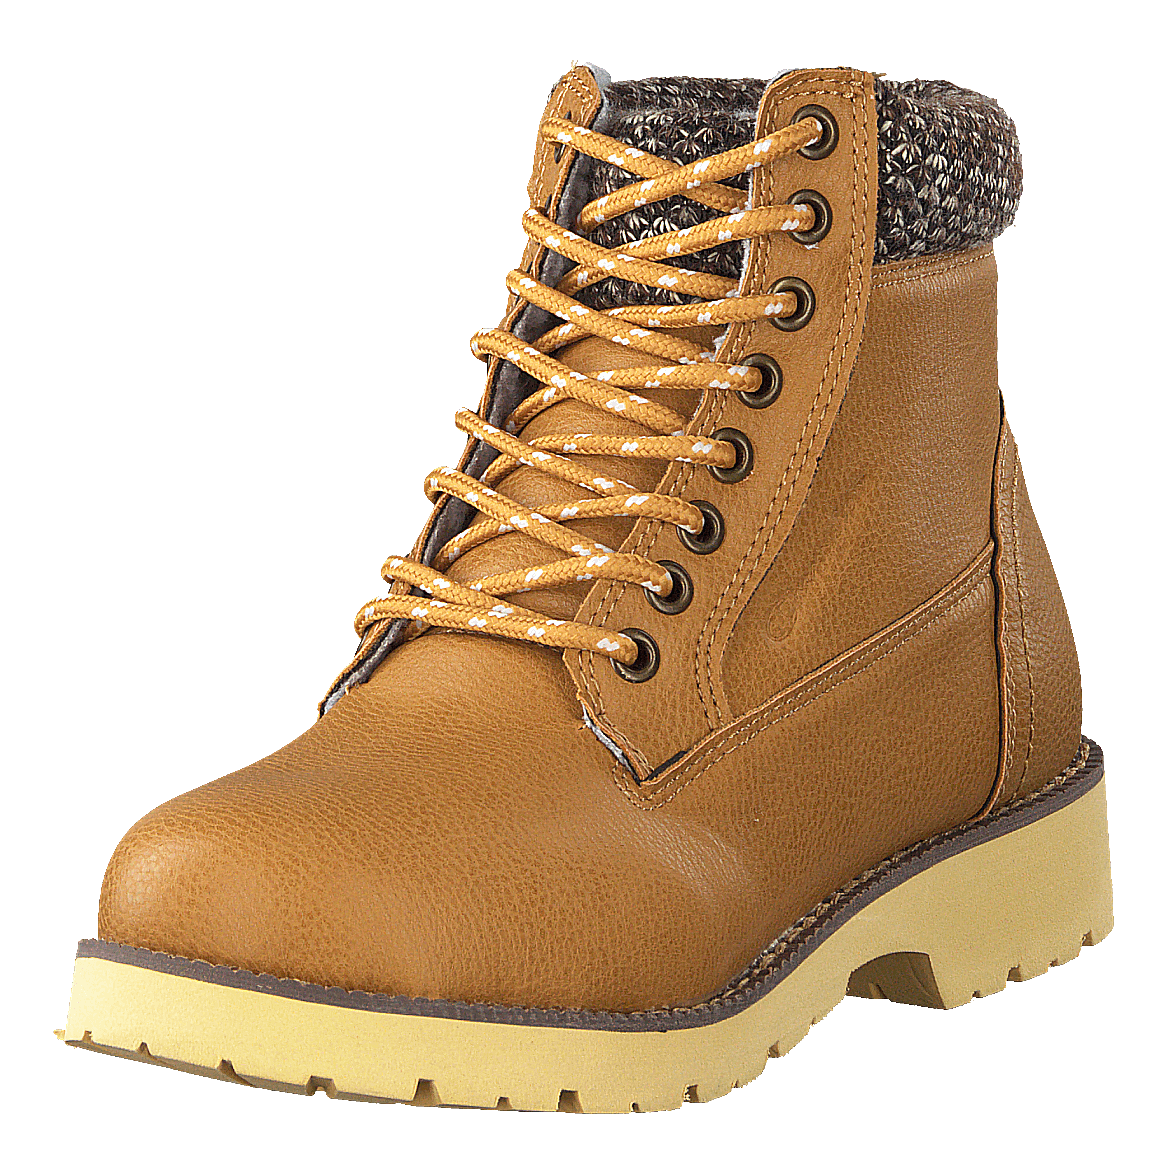 High Cut Shoe Upstate Mineral Yellow A